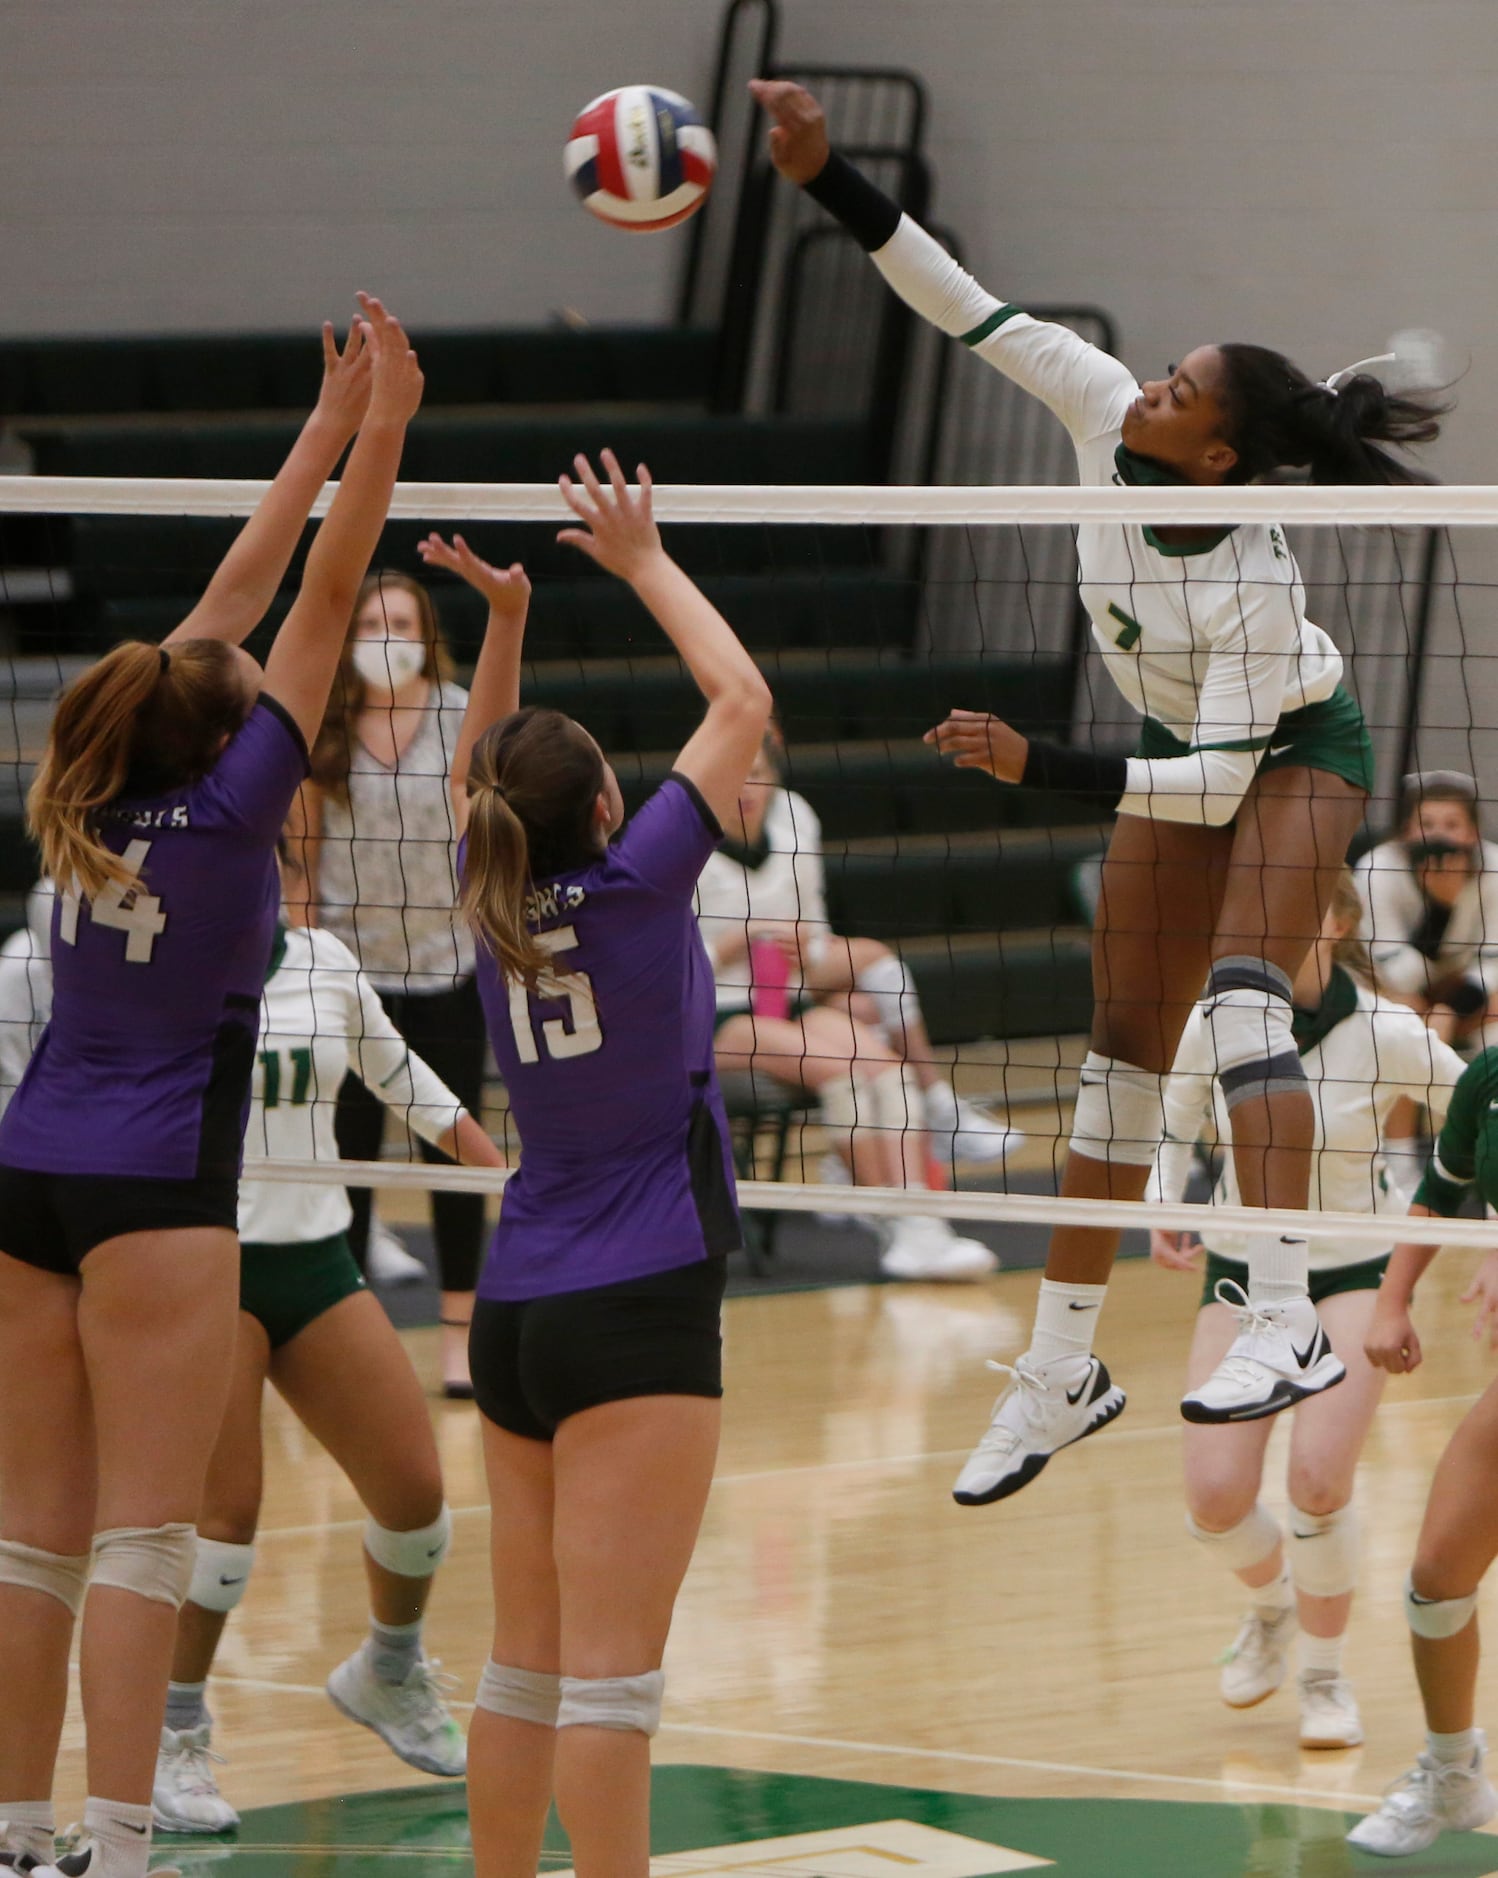 Frisco Lebanon Trail's Tyrah Ariail (7) skies well above the net to fire a shot that scored...